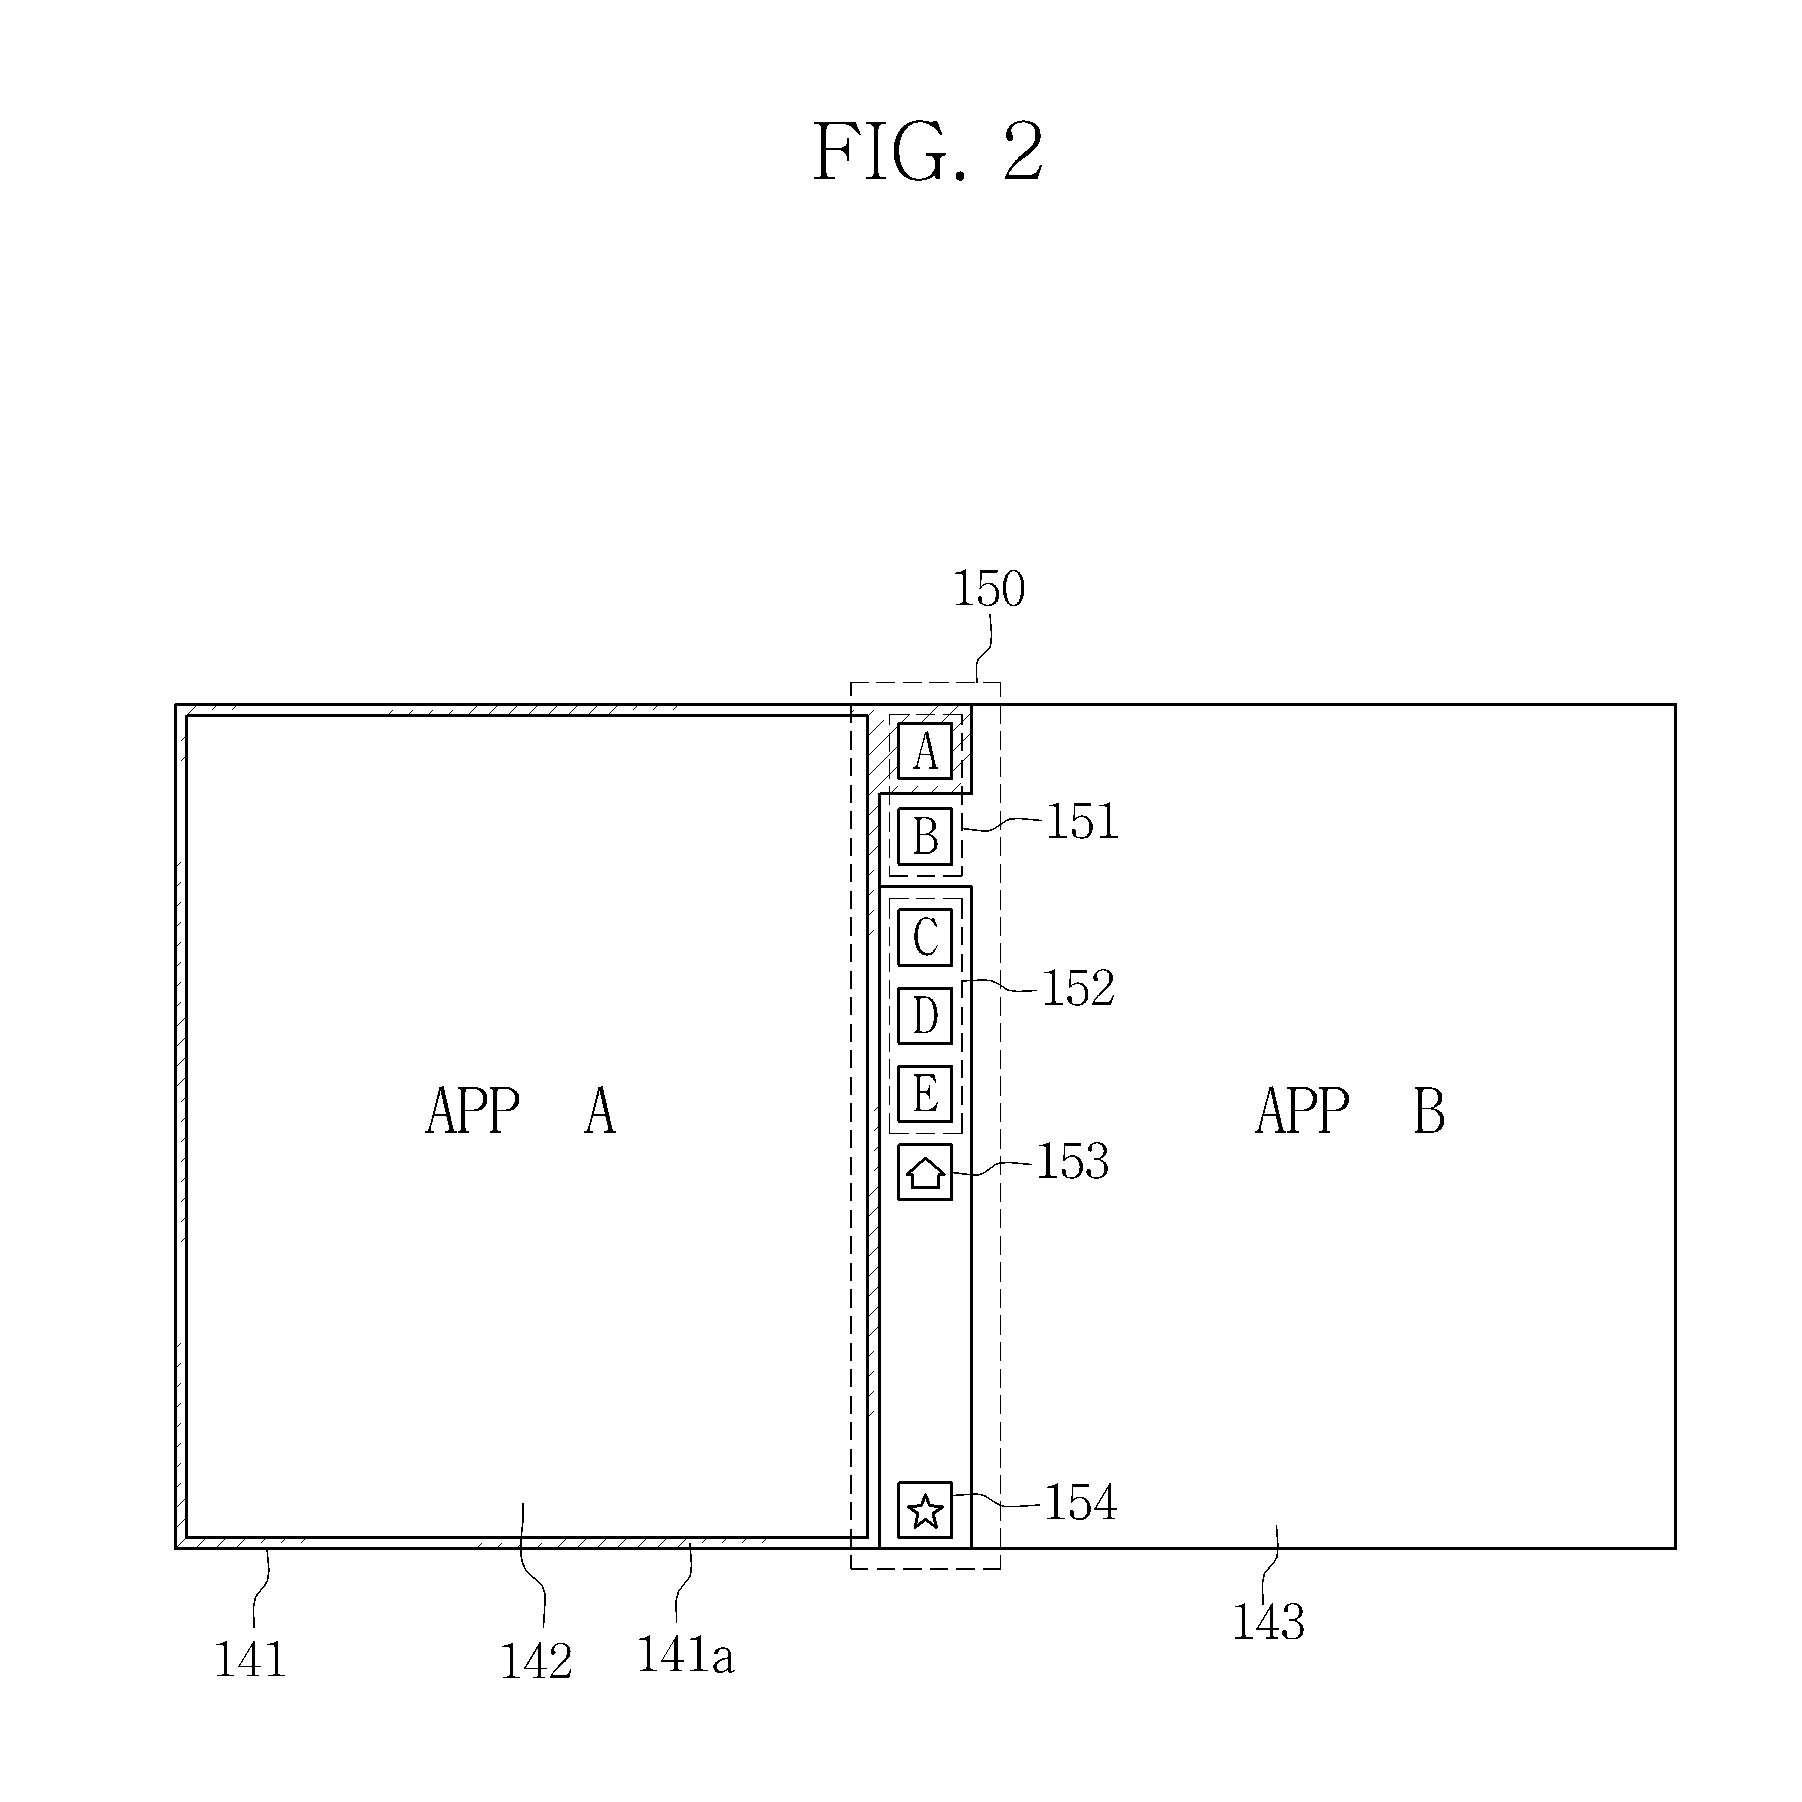 Method for providing user interface having multi-tasking function, mobile communication device, and computer readable recording medium for providing the same